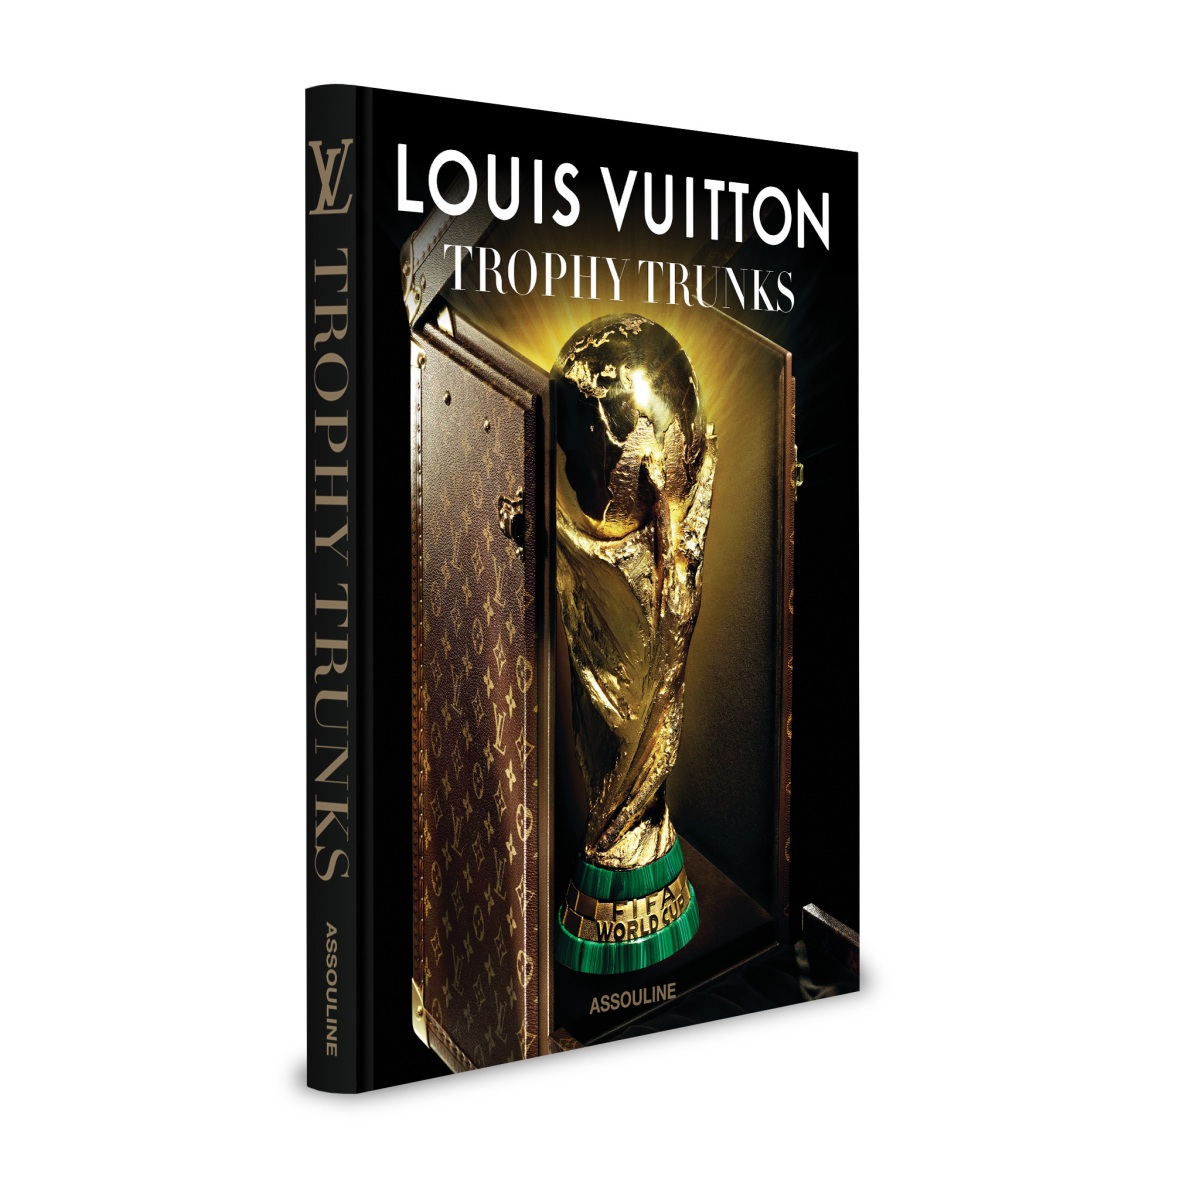 The 2023 Rugby World Cup Trophy Case is Another Victory for Louis